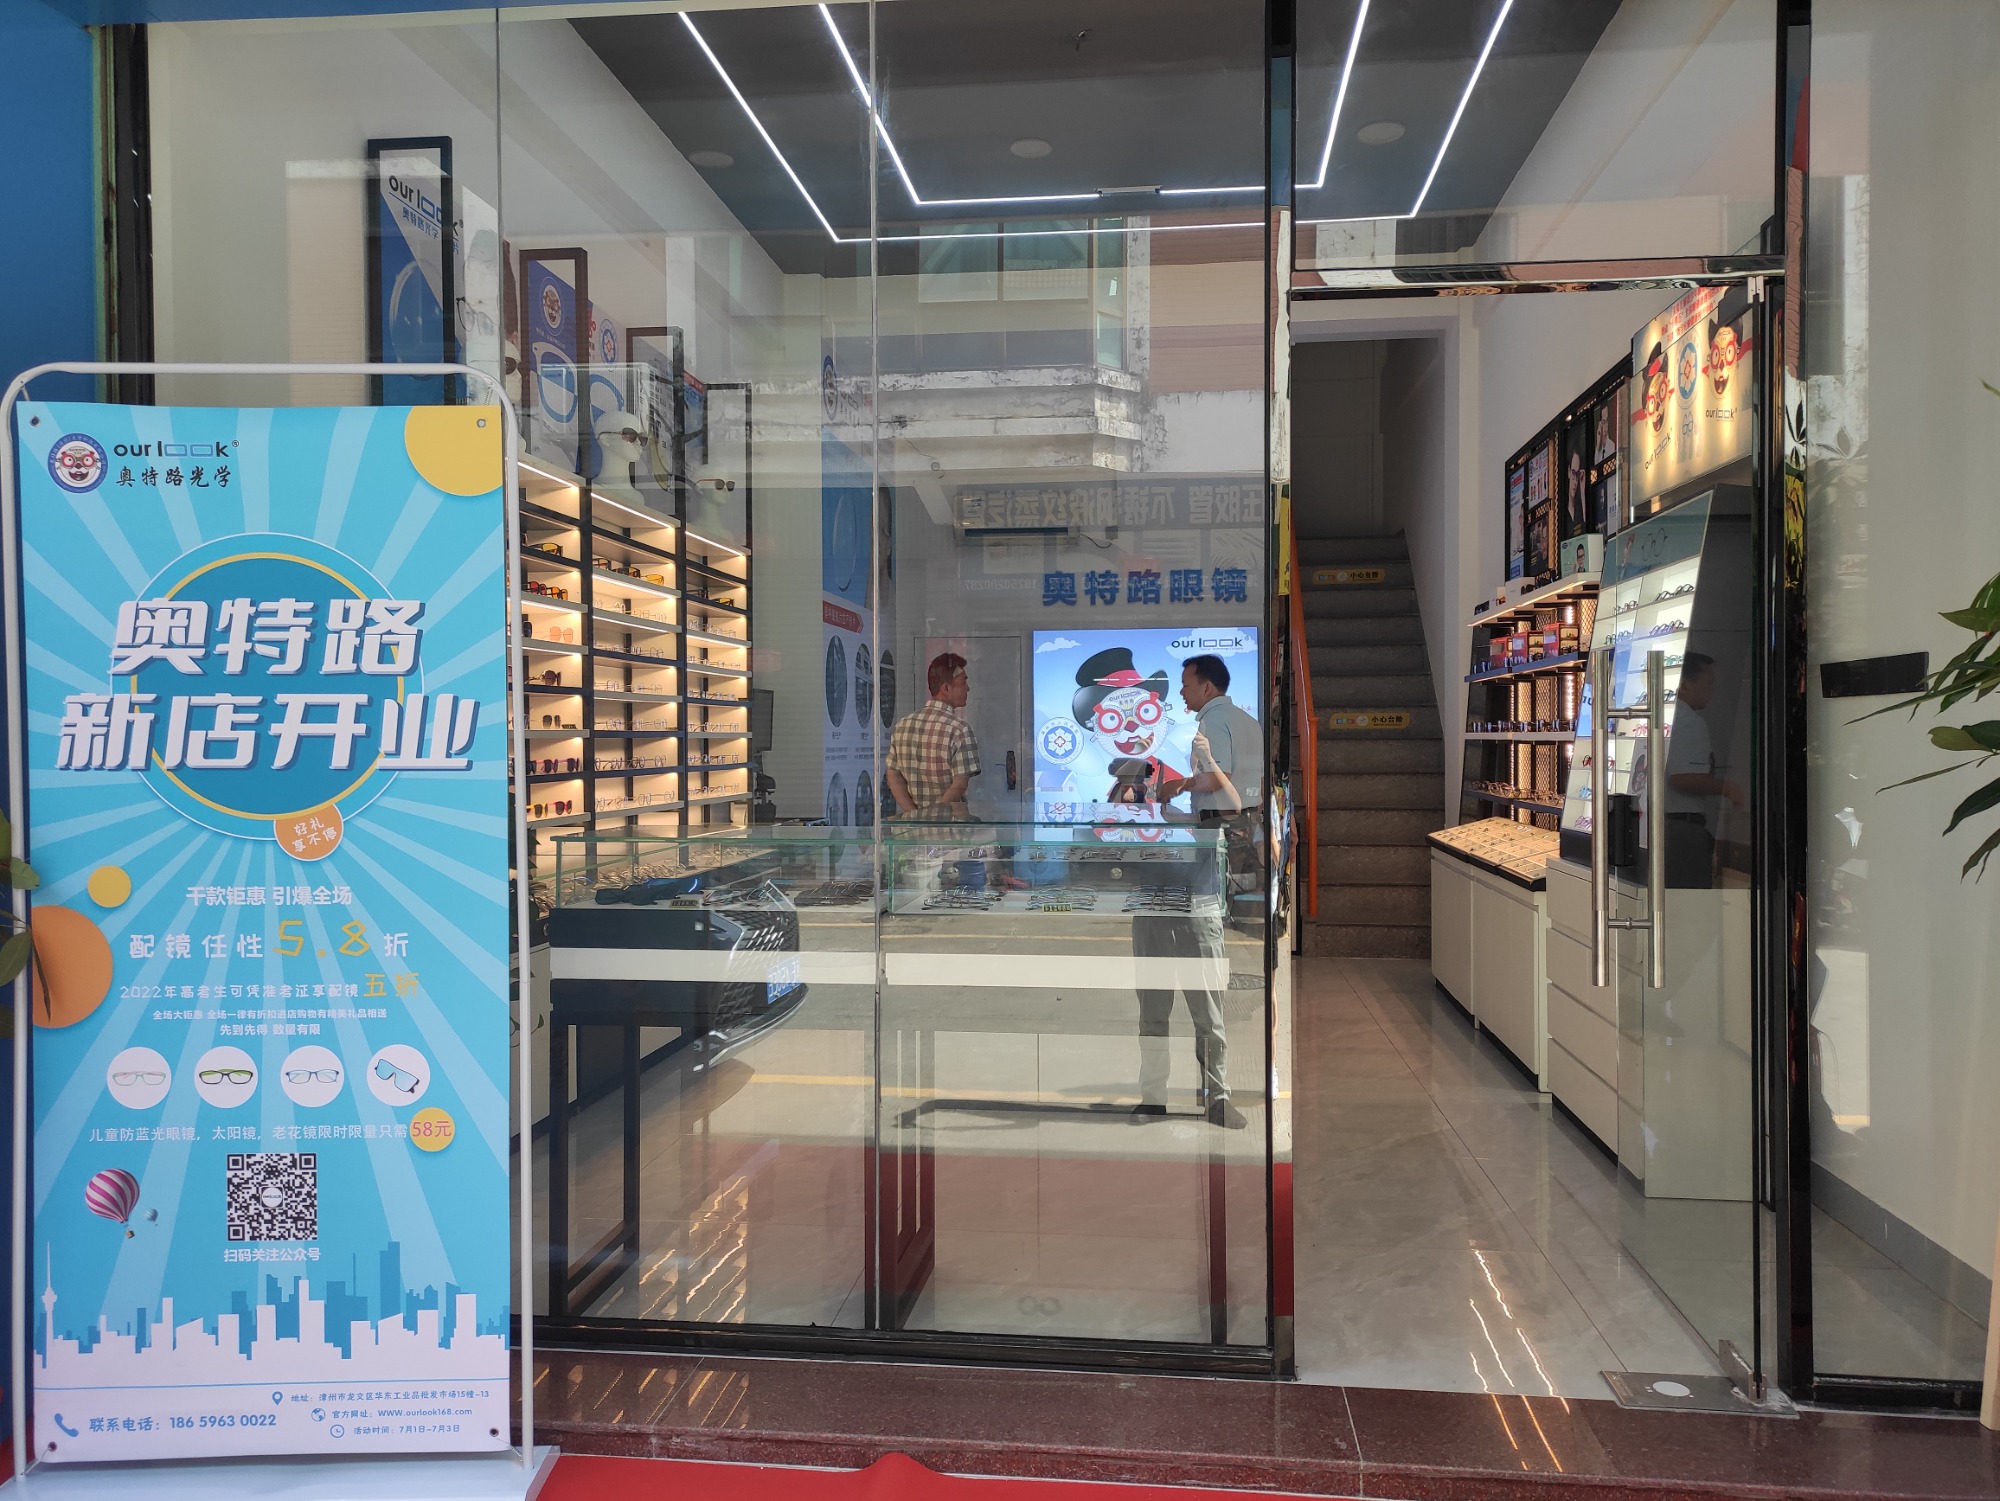 "Ingenuity to the Heart of the Party" Ourlook Eye Health Science Popularization Experience Hall East China Store was grandly opened